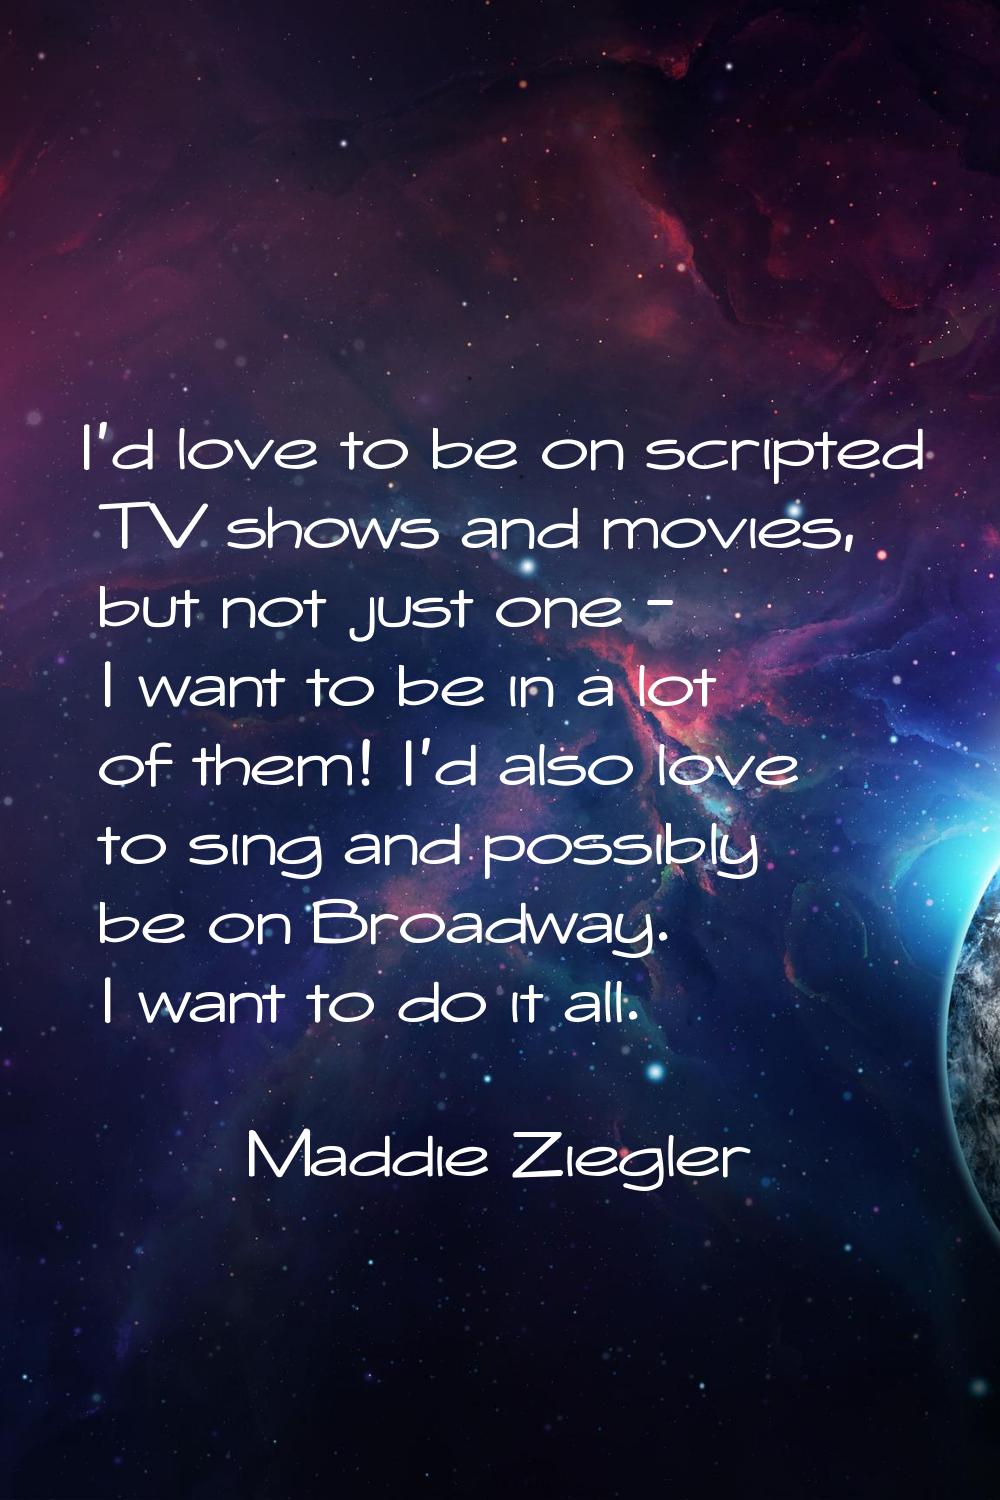 I'd love to be on scripted TV shows and movies, but not just one - I want to be in a lot of them! I